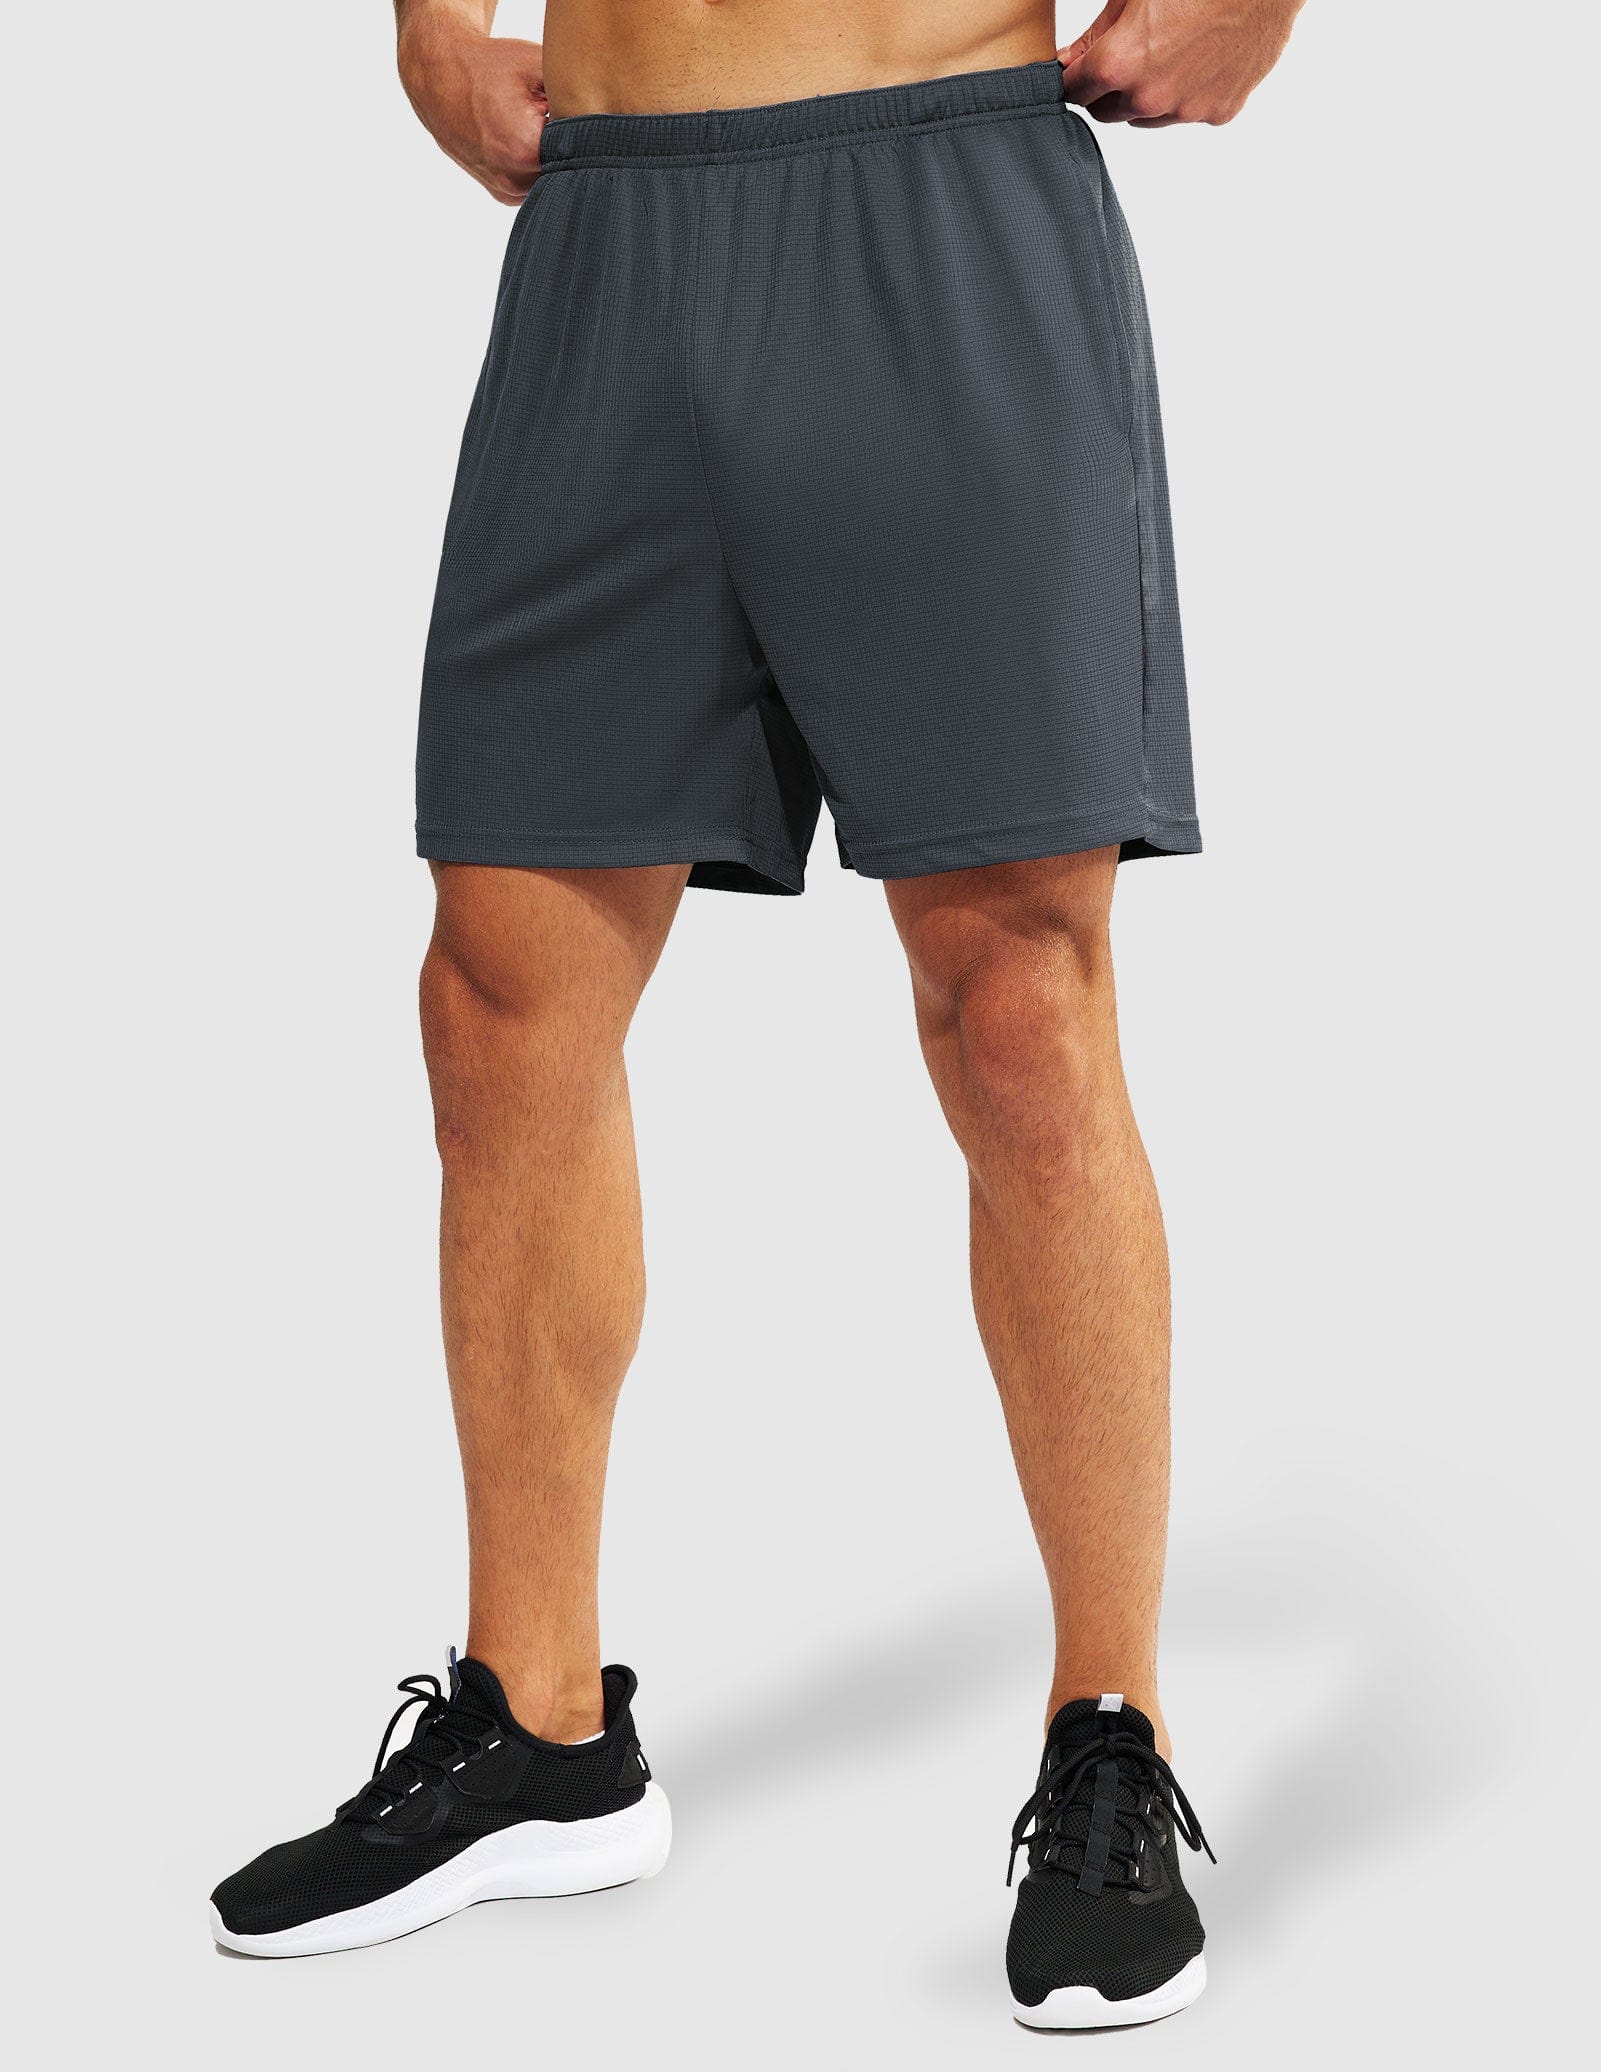 MIER Men's 5-Inch Running Shorts with Pockets & Liner